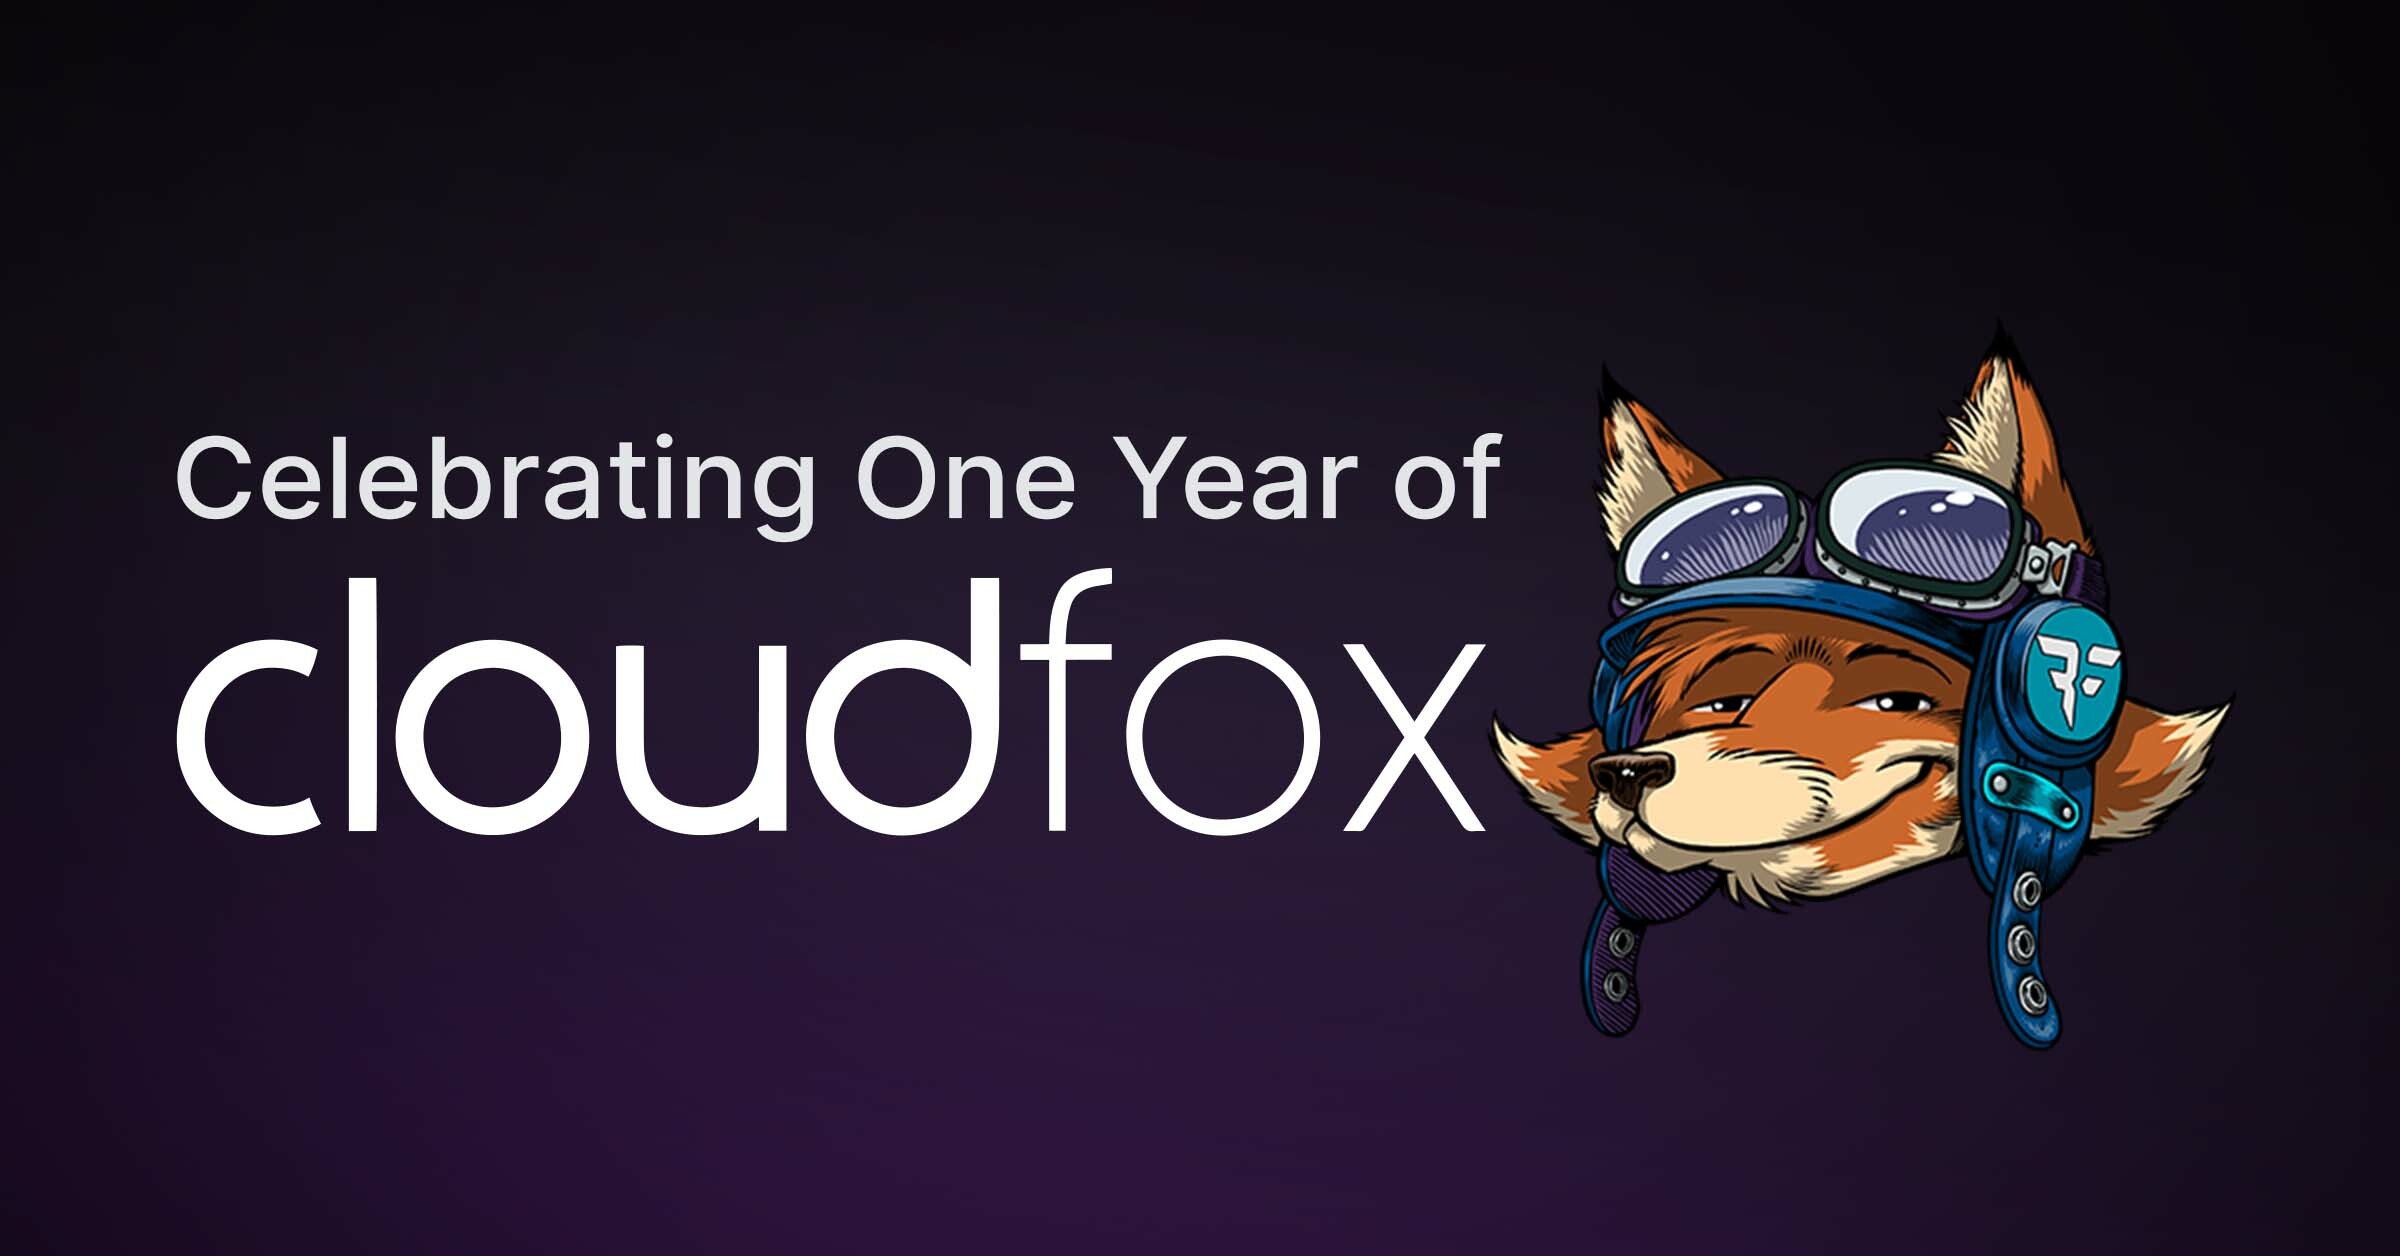 Celebrating one year of CloudFox with purple background and Bishop Fox CloudFox logo.